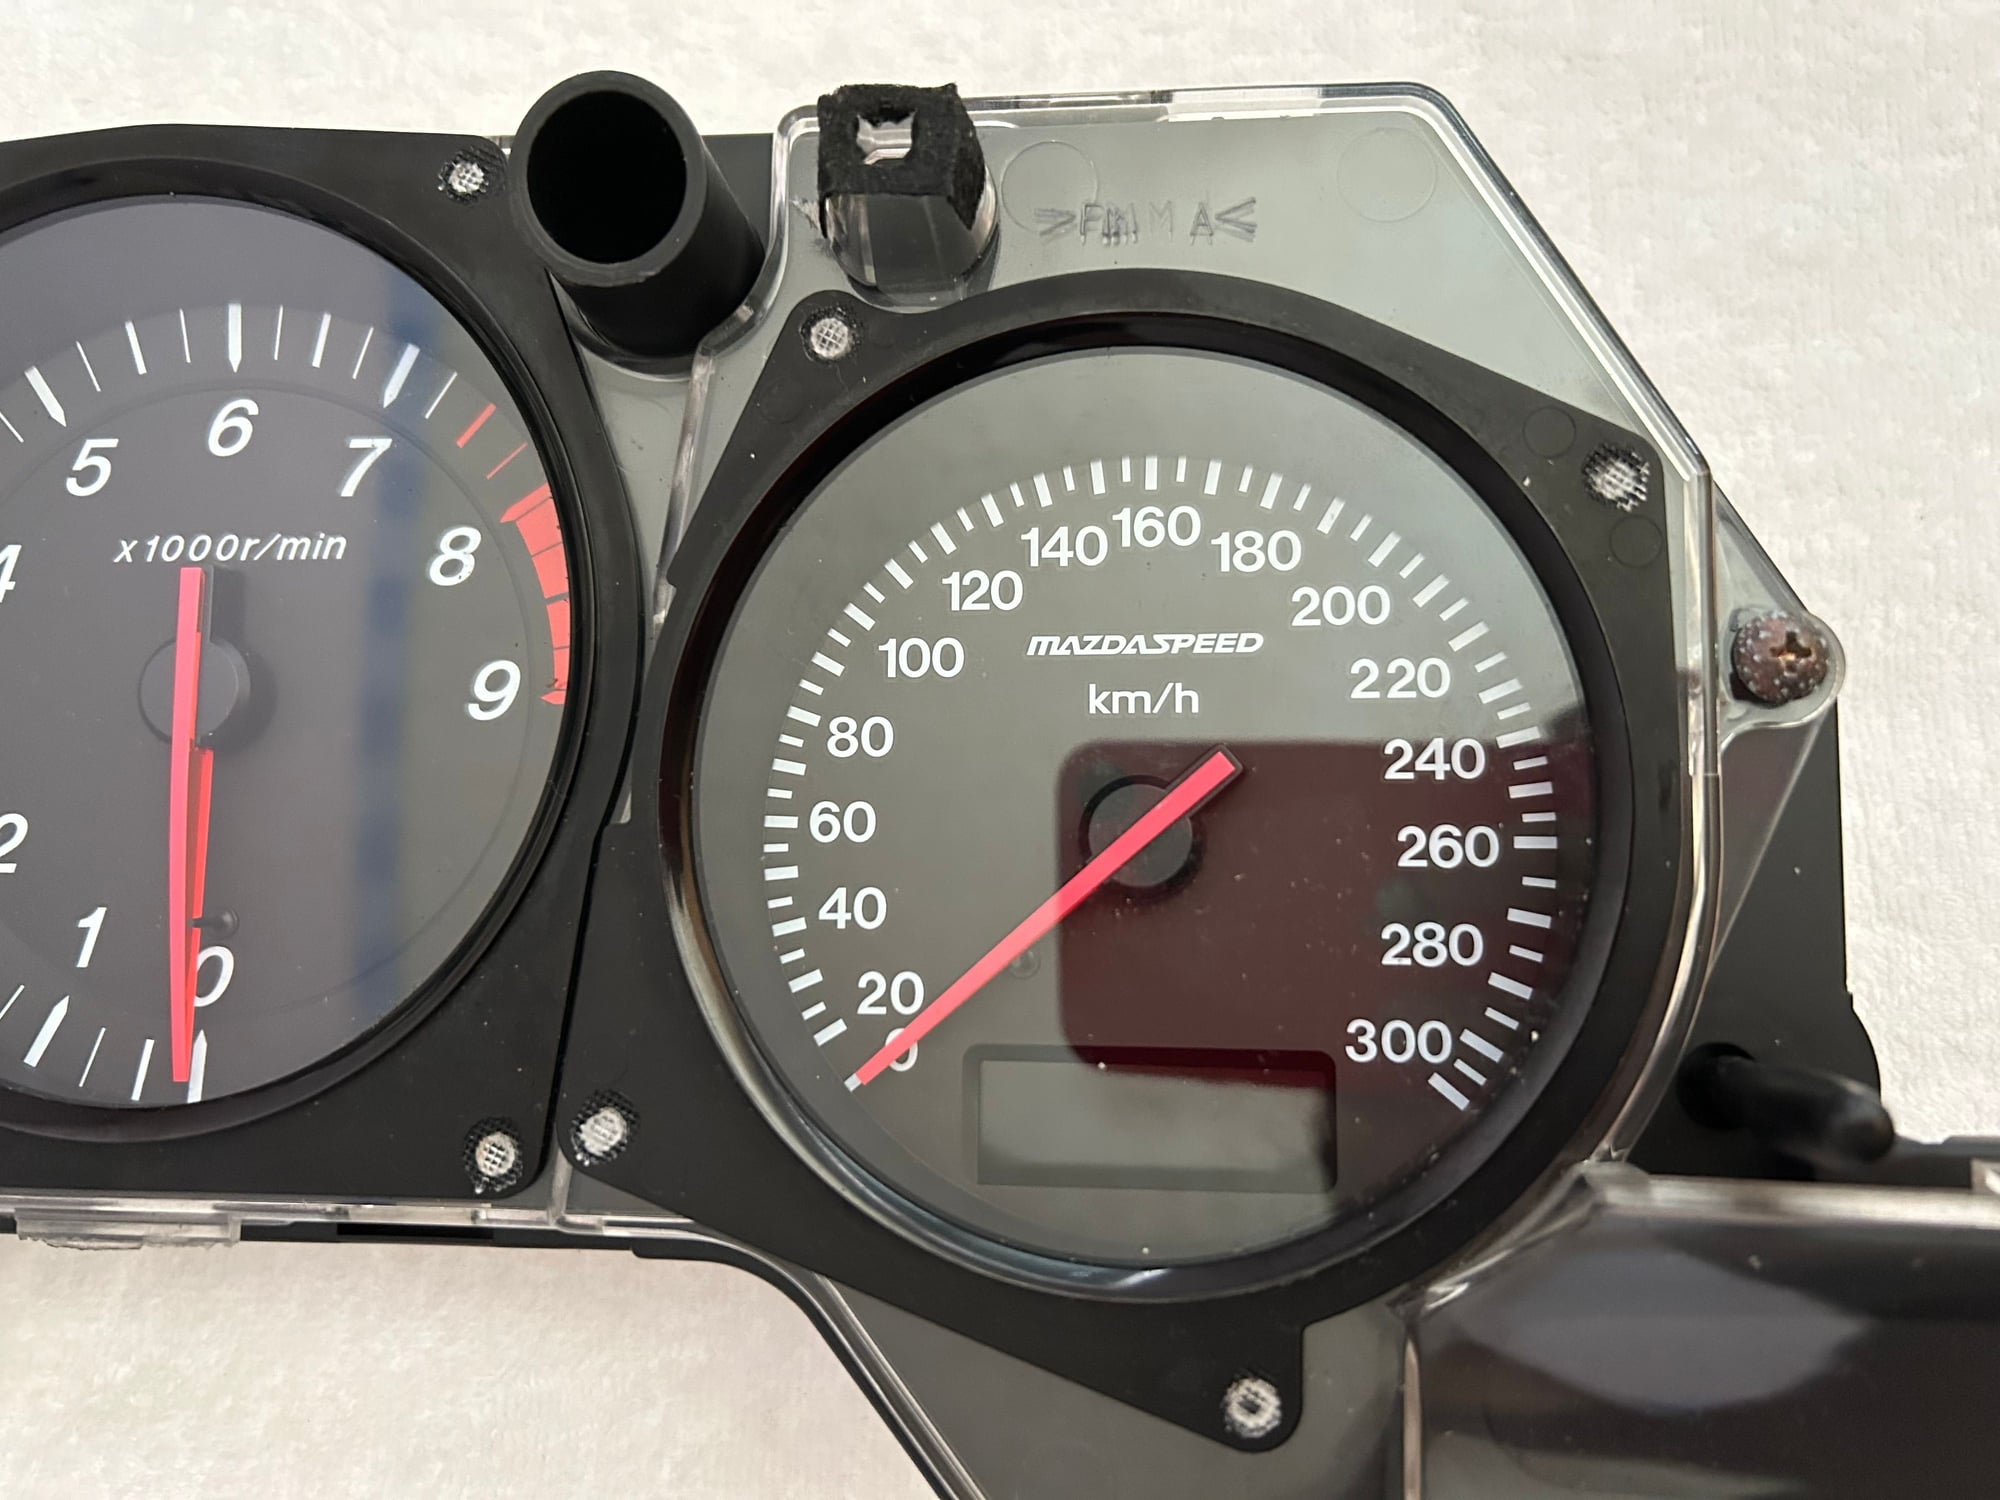 Interior/Upholstery - OEM 1999 Instrument Cluster w/ Mazdaspeed Speedometer - Used - 1992 to 2002 Mazda RX-7 - London HA27DY, United Kingdom